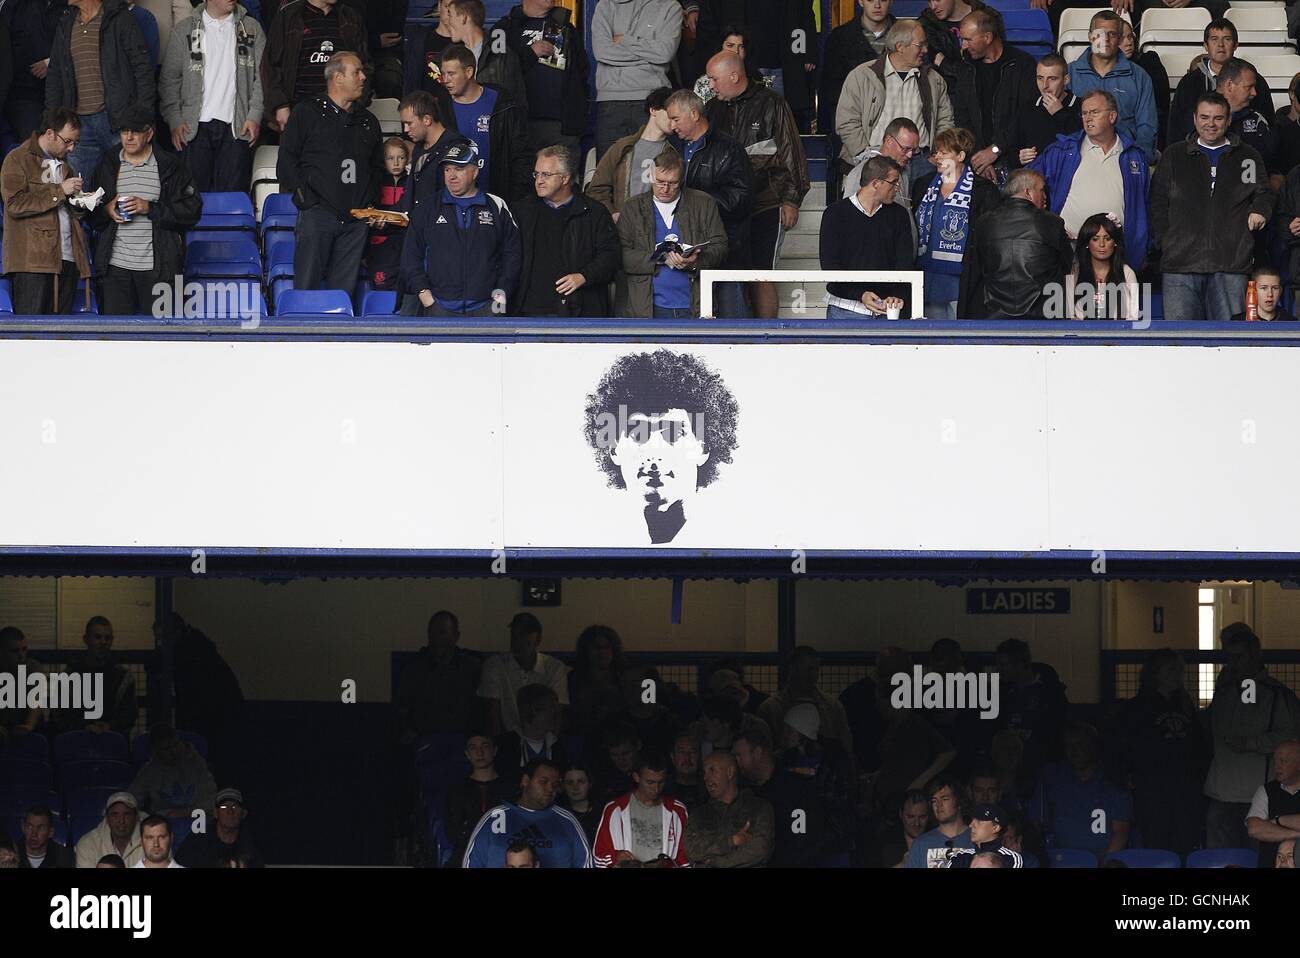 Soccer - Barclays Premier League - Everton v Manchester United - Goodison Park. A portrait of Marouane Fellaini on the Gwladys Street stand. Stock Photo